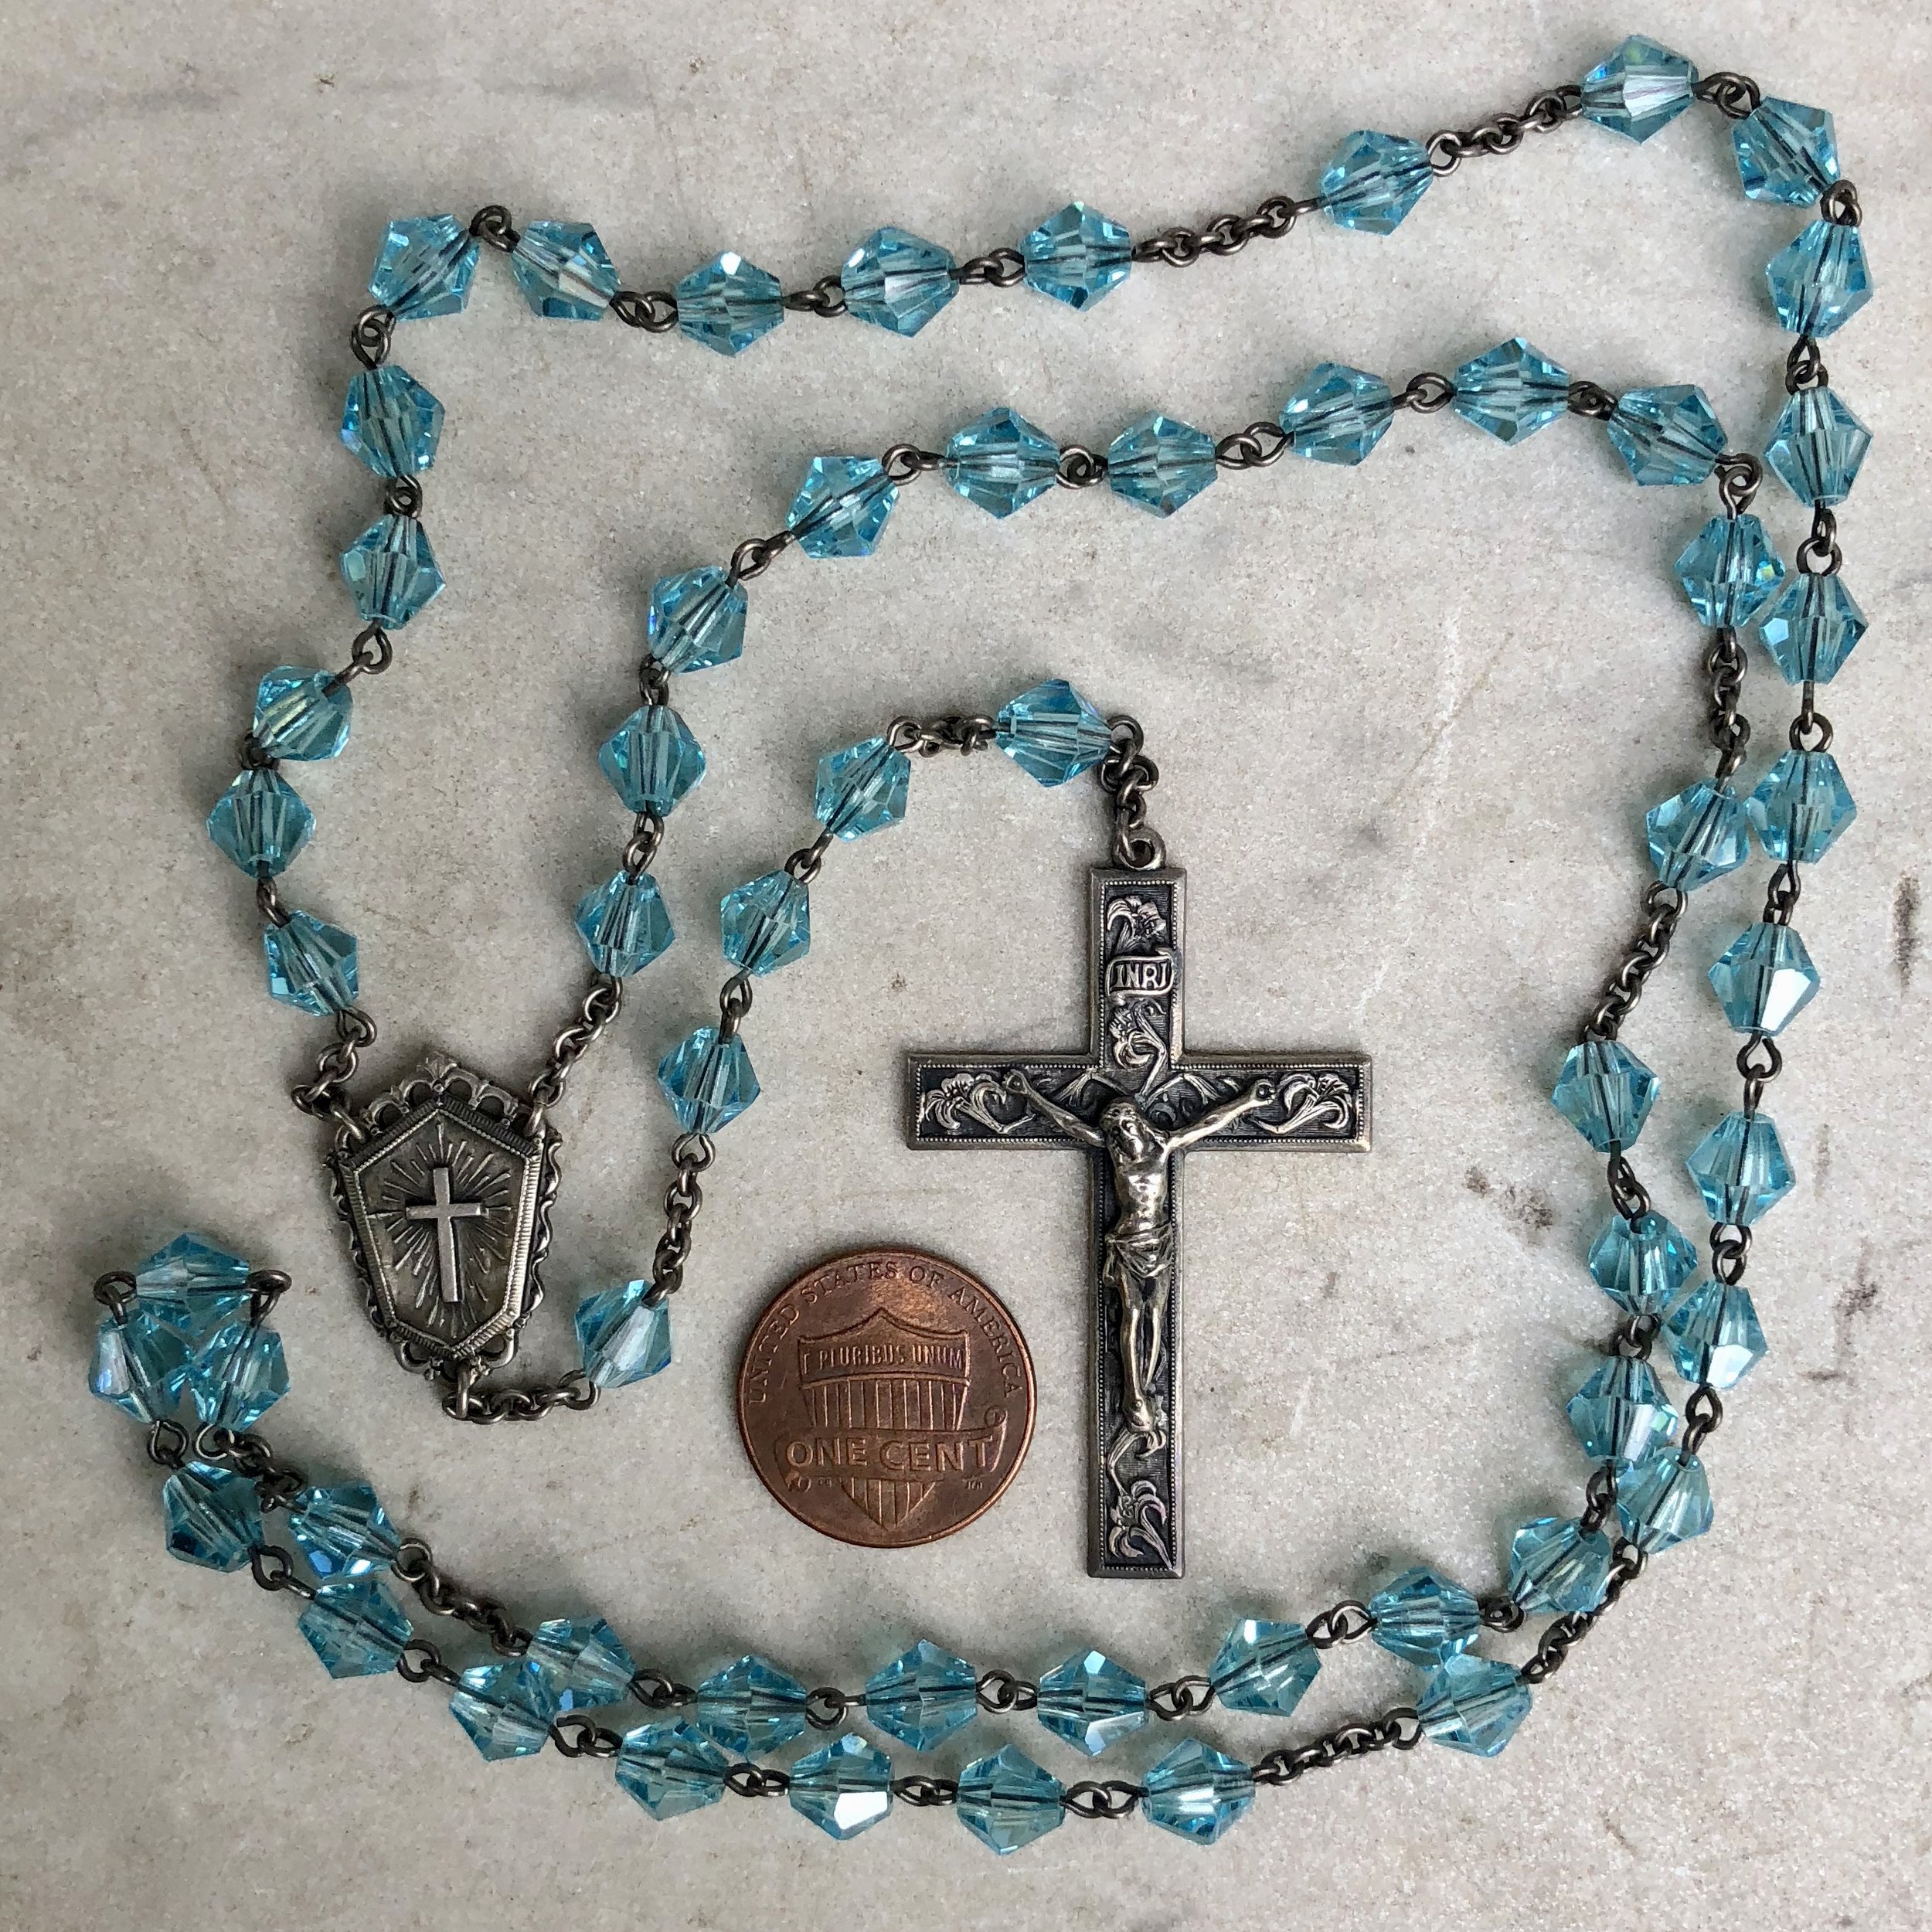 Gift Boxed St George-Paratrooper Center and 1 3/8 x 3/4 inch Crucifix George-Paratrooper Rosary with 6mm Aqua Color Fire Polished Beads Silver Finish St